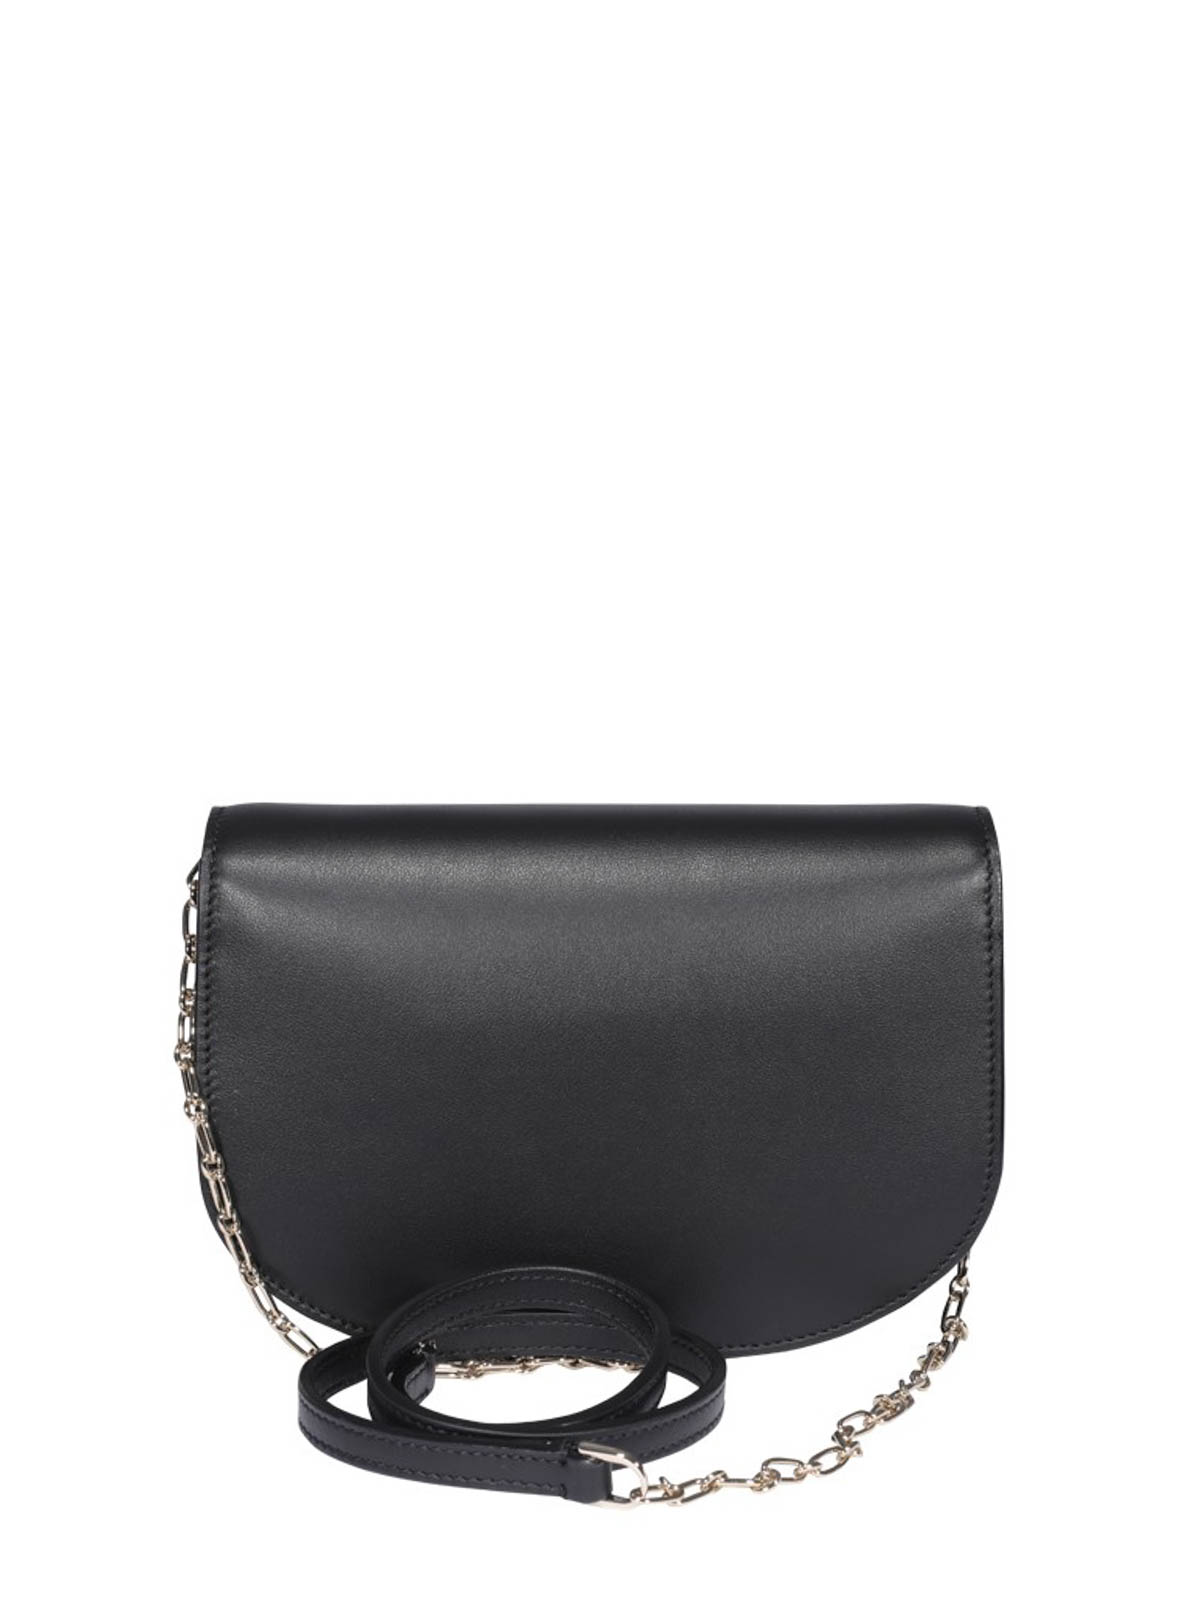 Cross body bags Bally - Clayn leather bag - 6226896 | Shop online at iKRIX